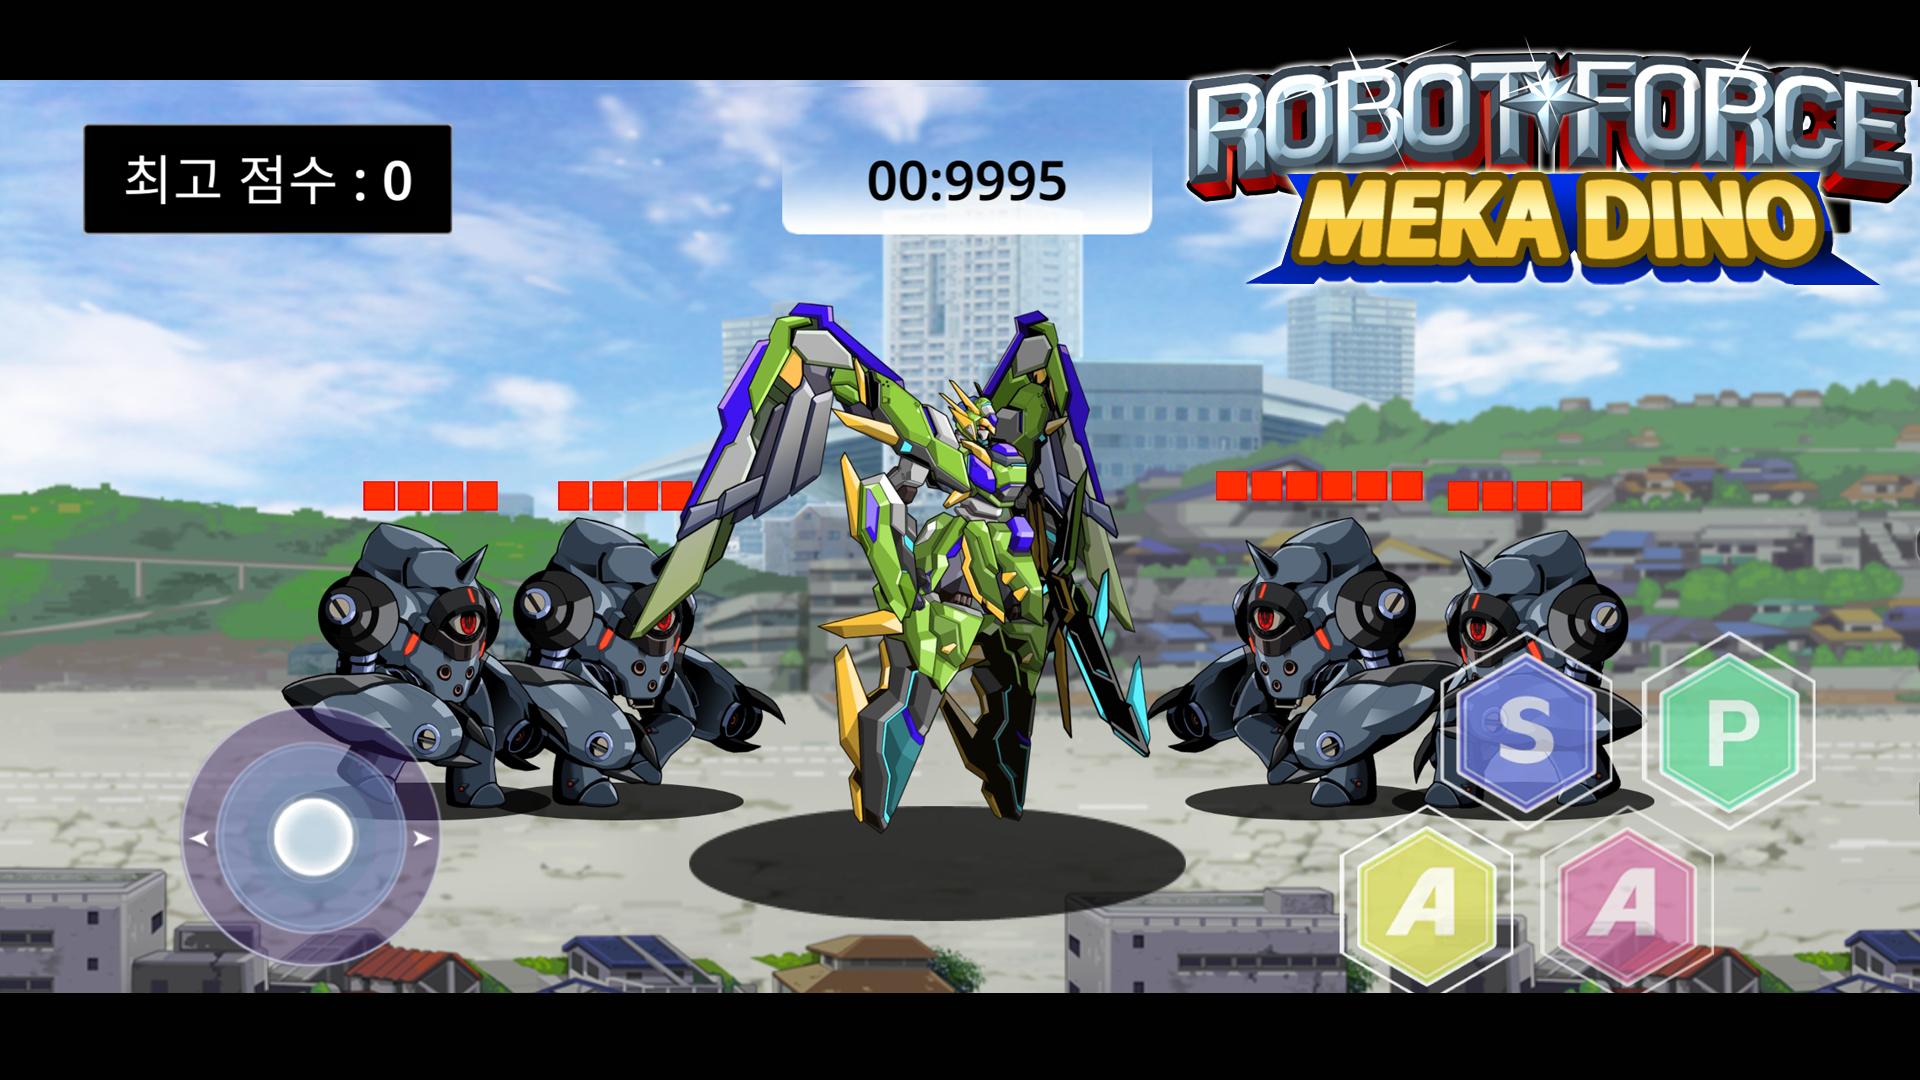 Robot force - Mechadino : Pteraforce for Android - APK Download